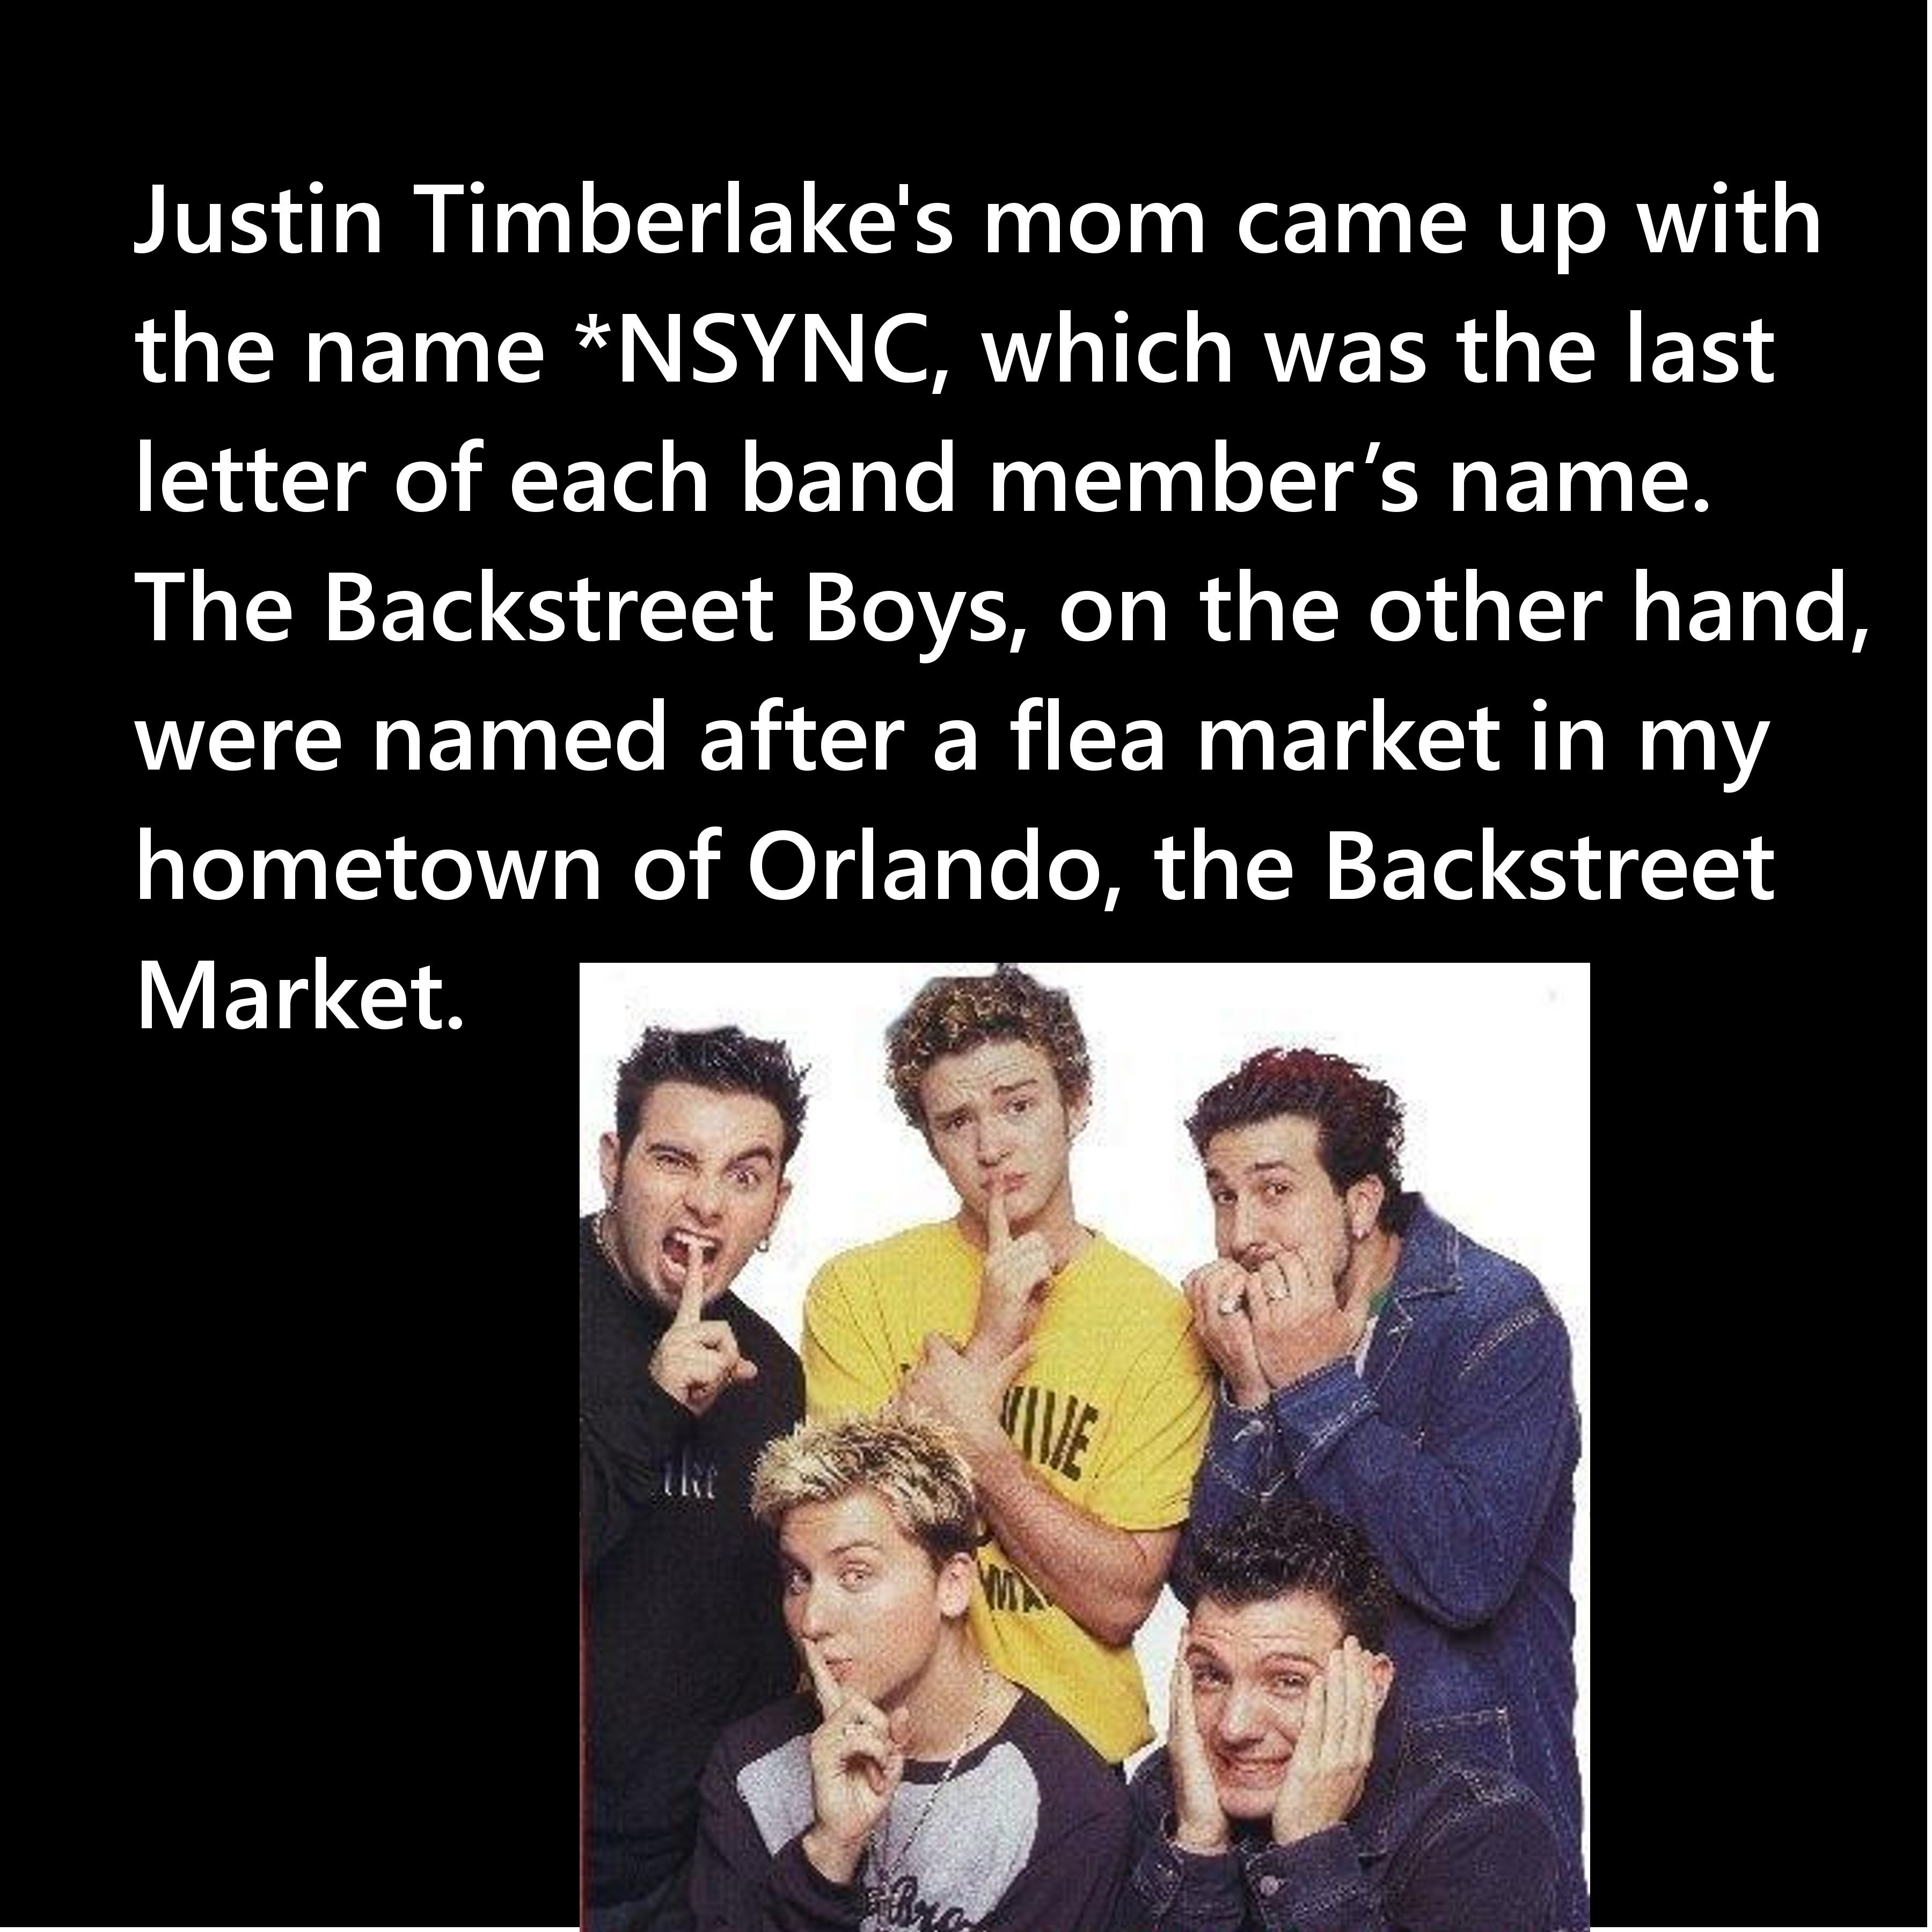 nsync funny - Justin Timberlake's mom came up with the name Nsync, which was the last letter of each band member's name. The Backstreet Boys, on the other hand, were named after a flea market in my hometown of Orlando, the Backstreet Market.